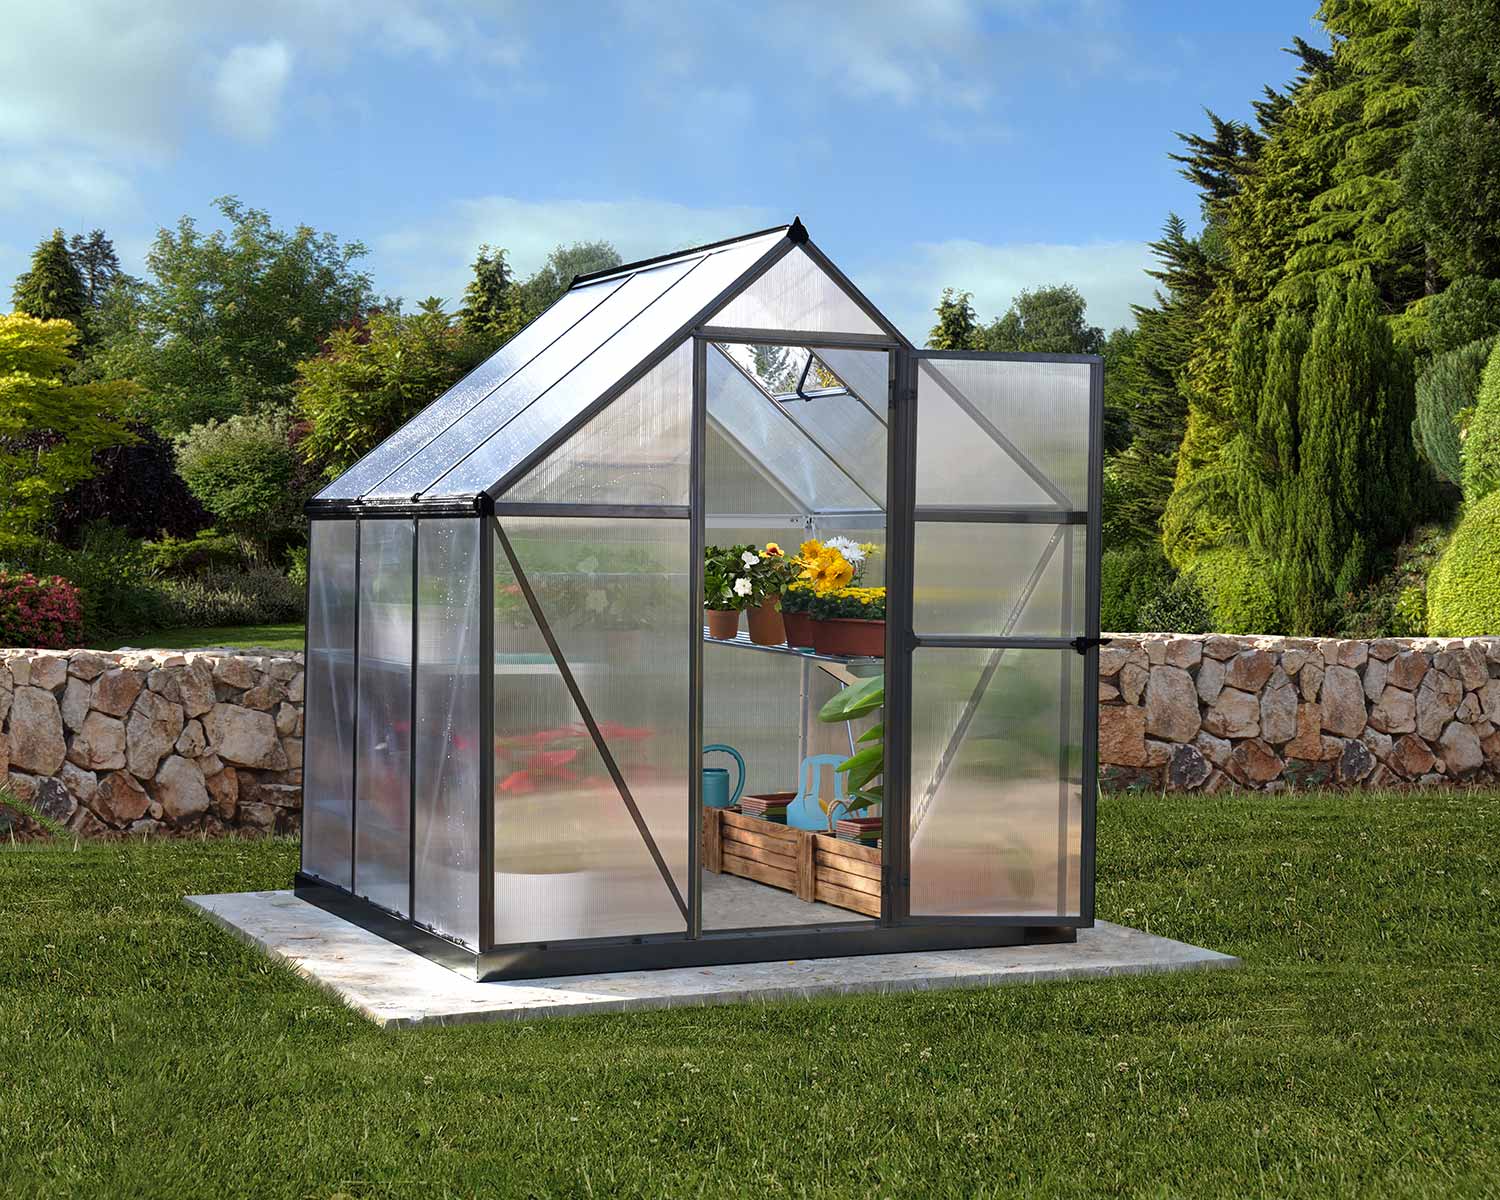 Greenhouse Mythos 6&#039; x 6&#039; Grey Structure &amp; Twinwall Panels outside on a lawn